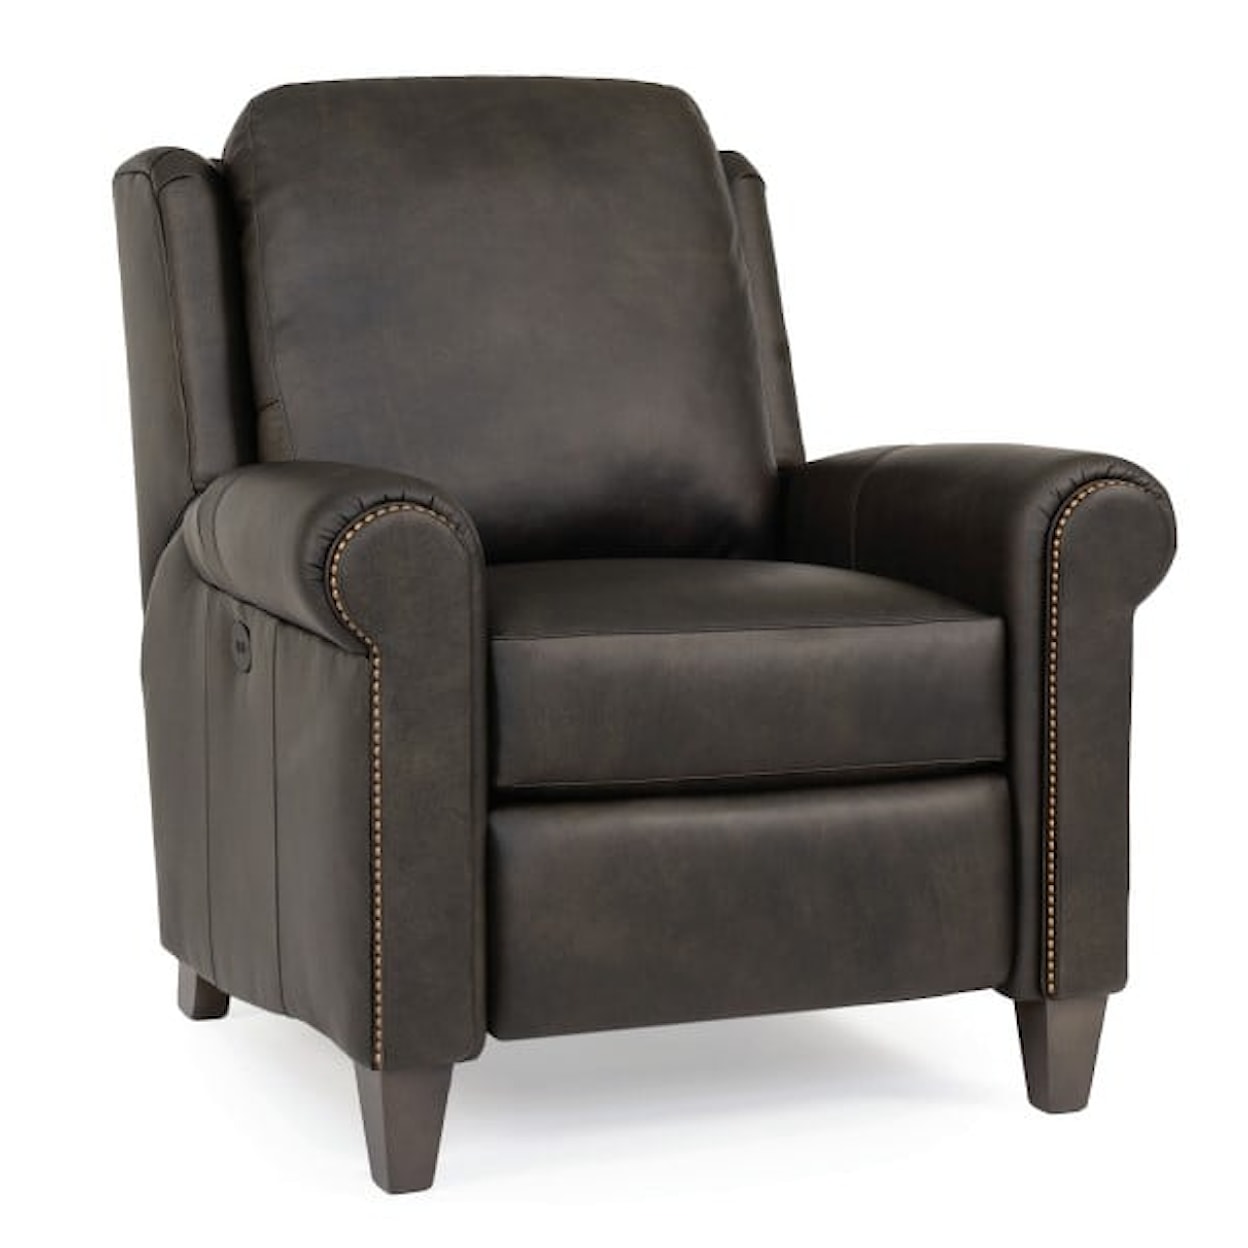 Smith Brothers 738 Power Recliner